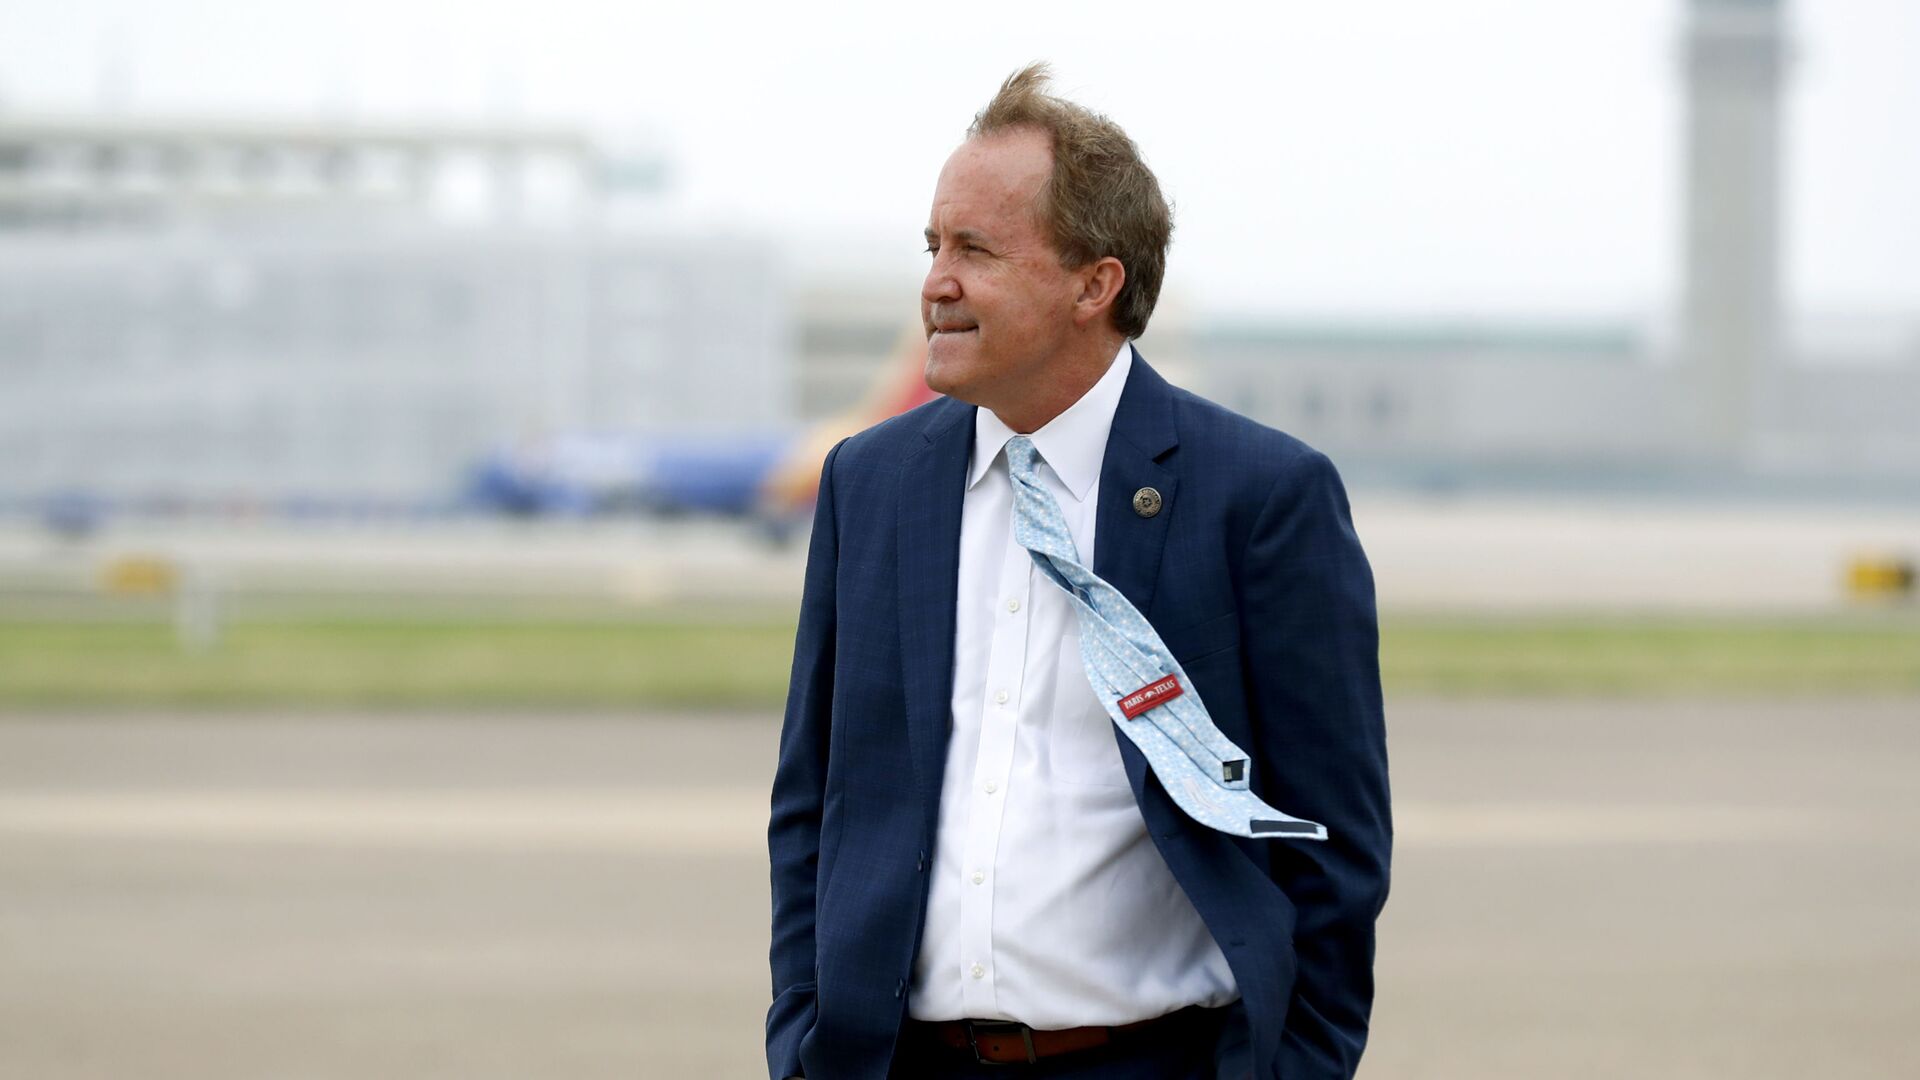 In this June 28, 2020 file photo, Texas' Attorney General Ken Paxton waits on the flight line for the arrival of Vice President Mike Pence at Love Field in Dallas. The mass exodus of Paxton's top staff over accusations of bribery against their former boss has left the Republicans seeking $43 million in public funds to replace some of them with outside lawyers to lead a high-profile antitrust lawsuit against Google. - Sputnik International, 1920, 17.09.2023